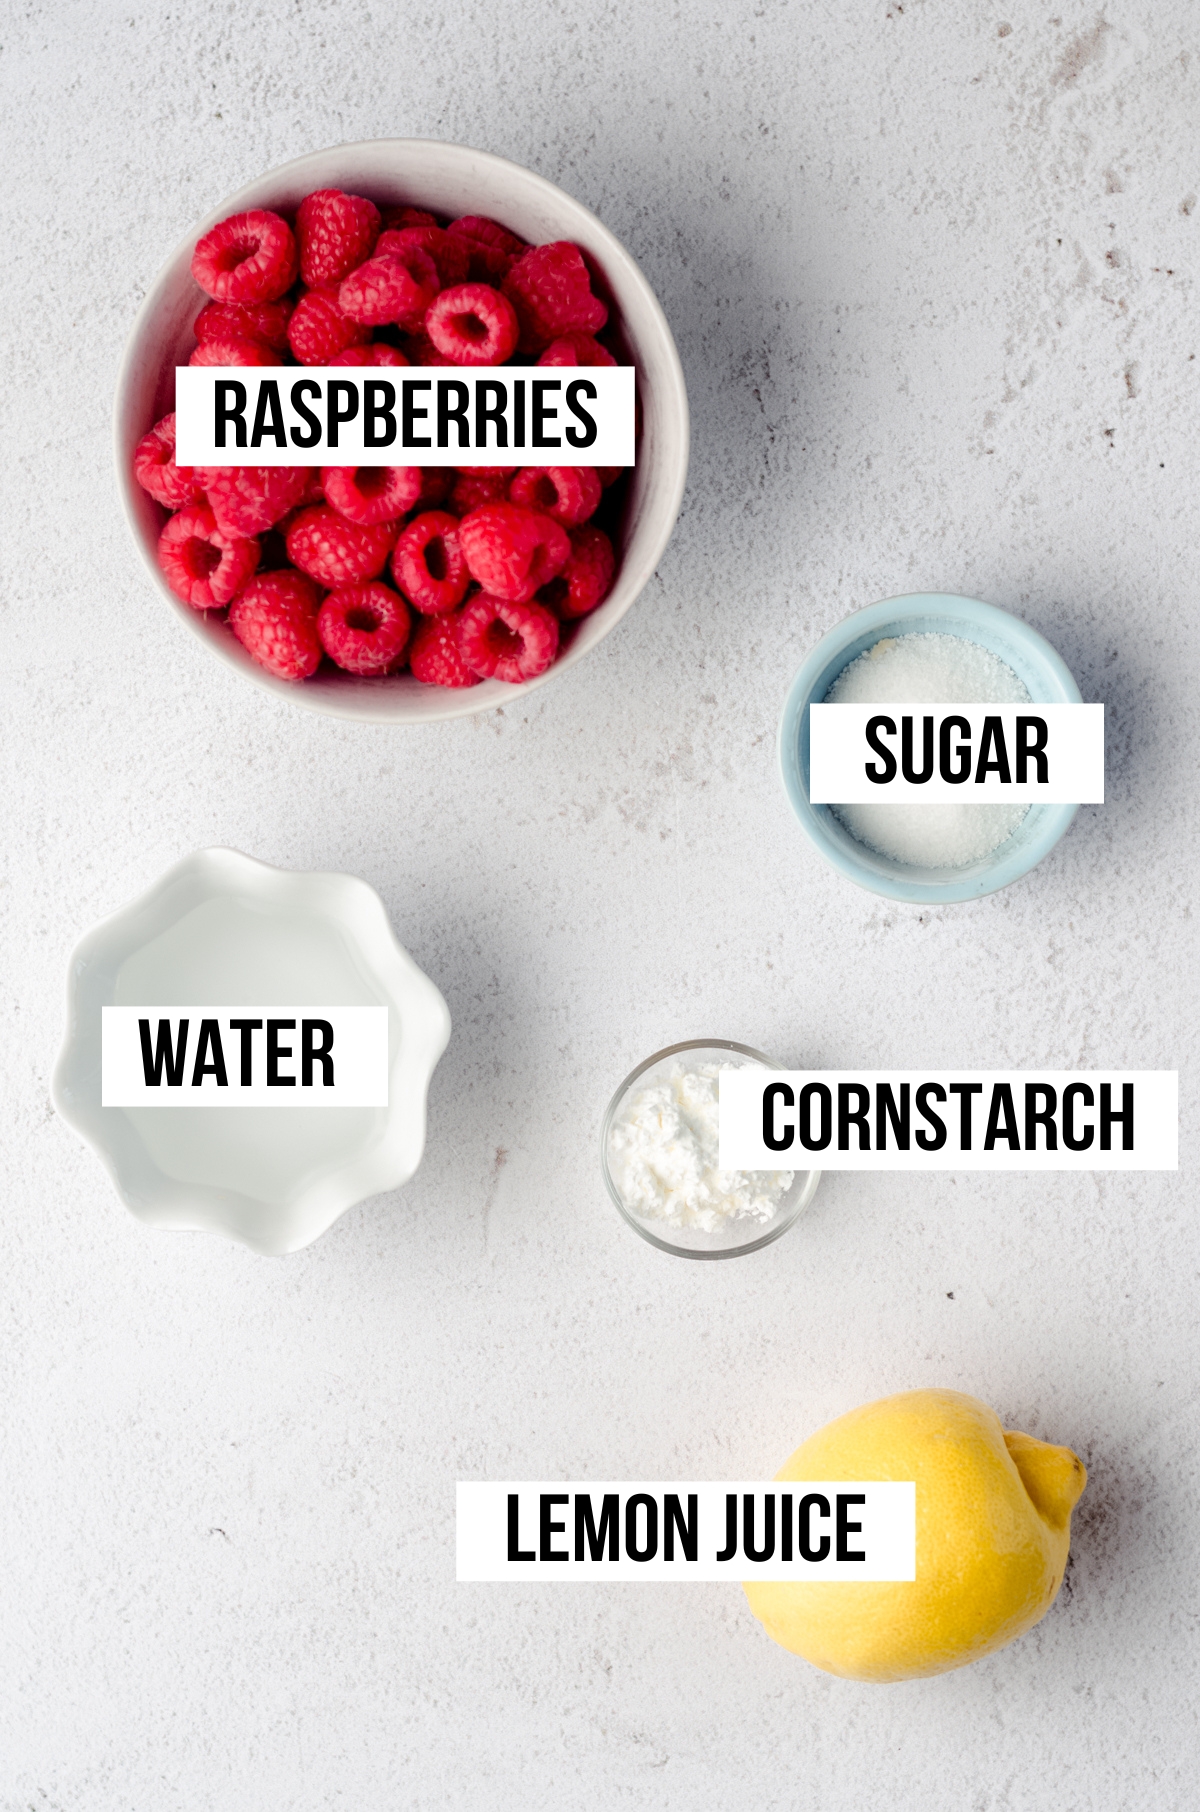 Ingredients for raspberry filling for Linzer cookies with text overlay.